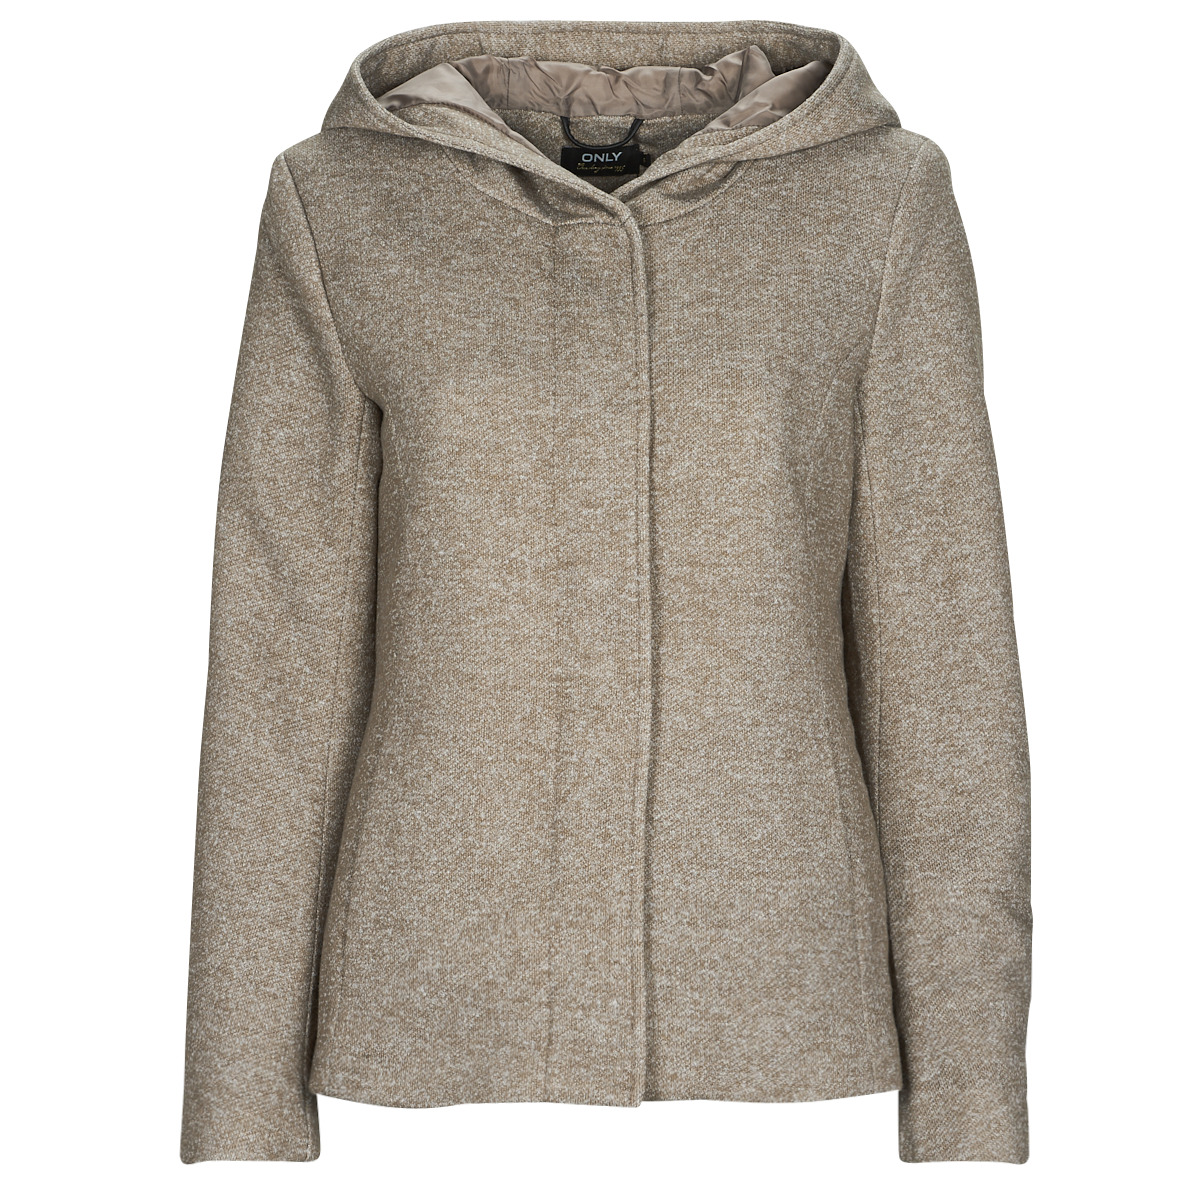 Only ONLSEDONA LIGHT SHORT JACKET Clothing - Free Spartoo ! - | Women coats Brown NET delivery